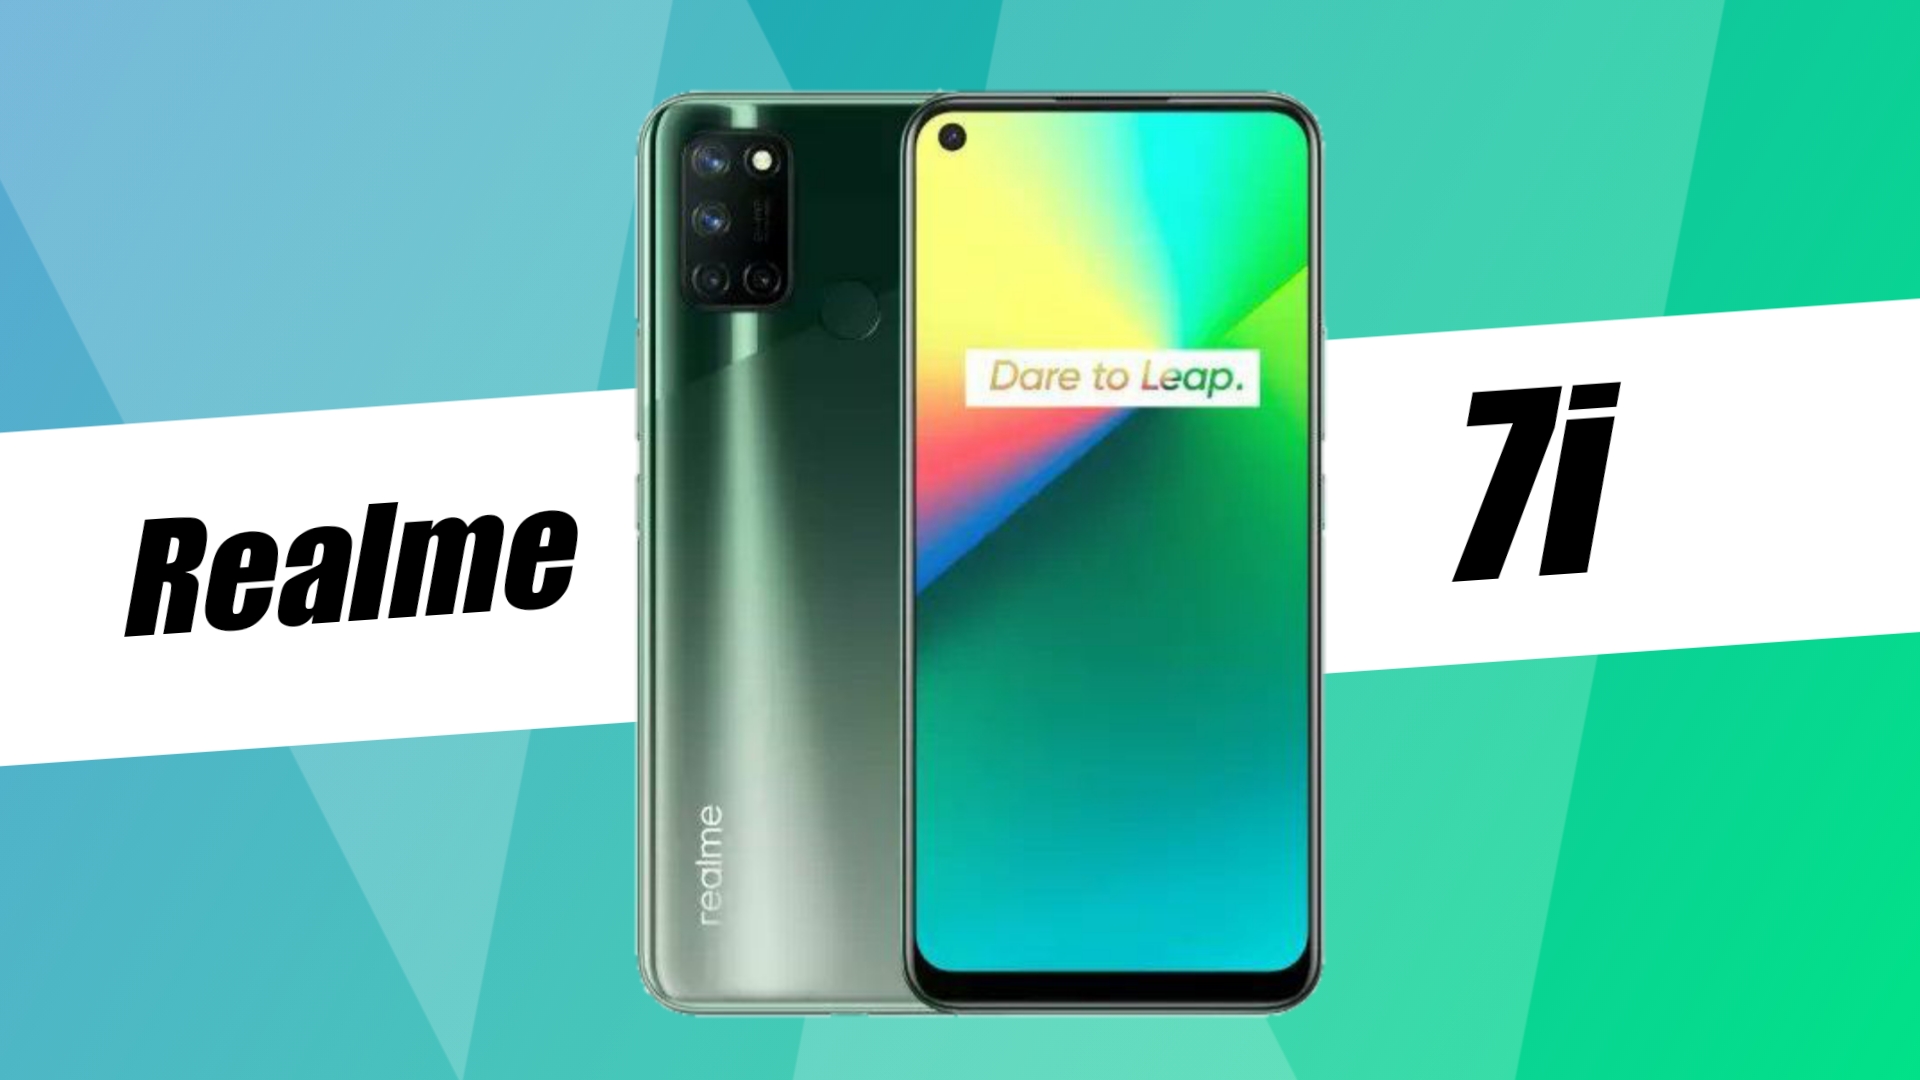 Realme 7i launched in India with Snapdragon 662 SoC: Specifications, Price